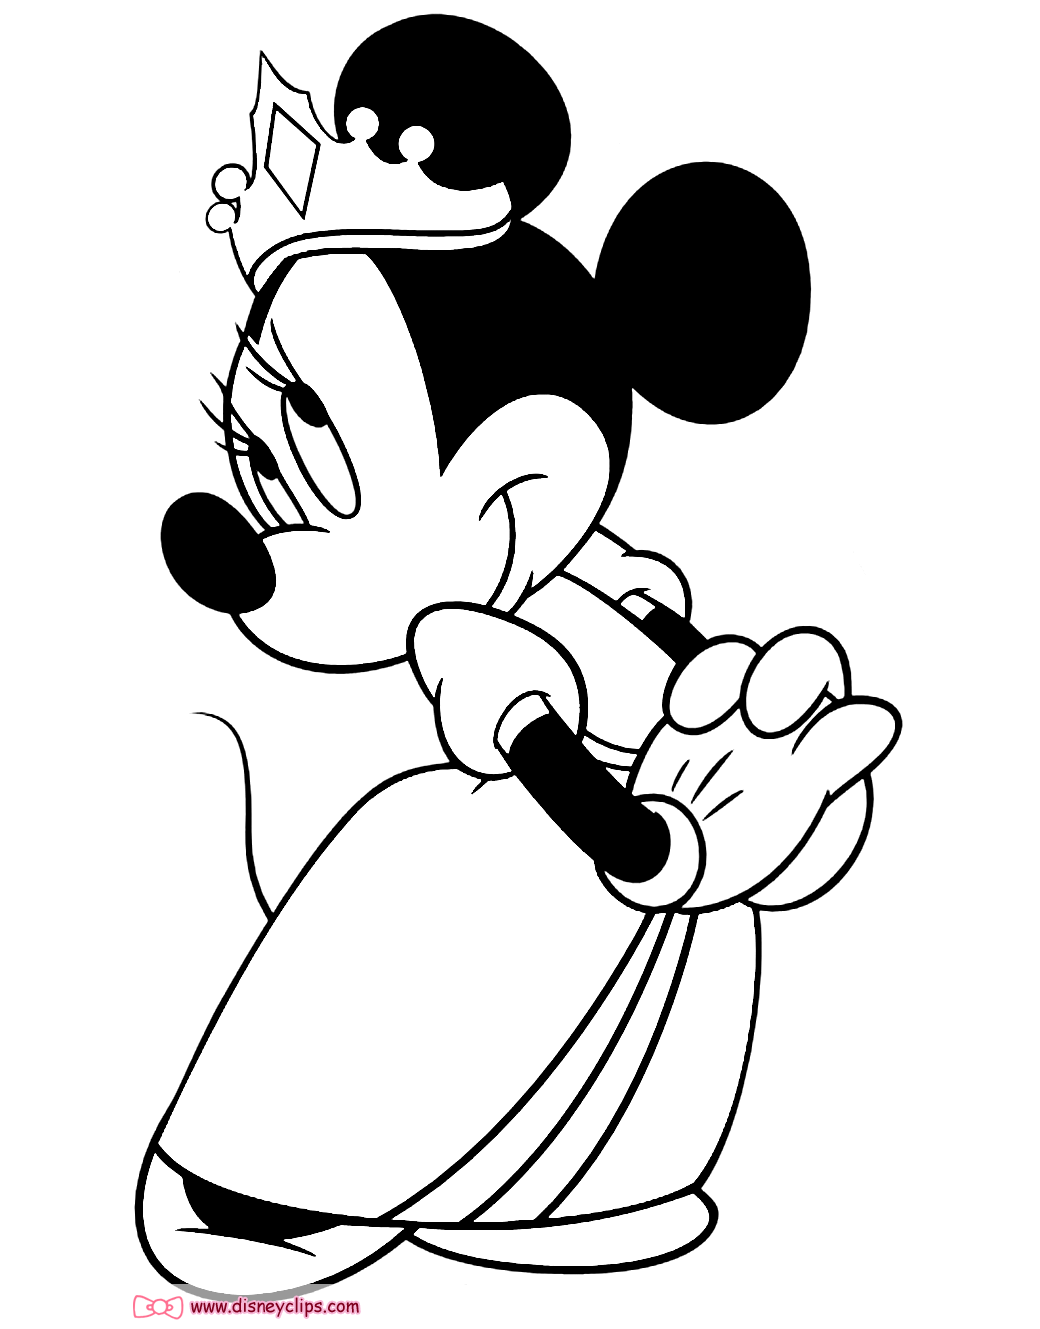 16+ Free printable minnie mouse coloring pictures info